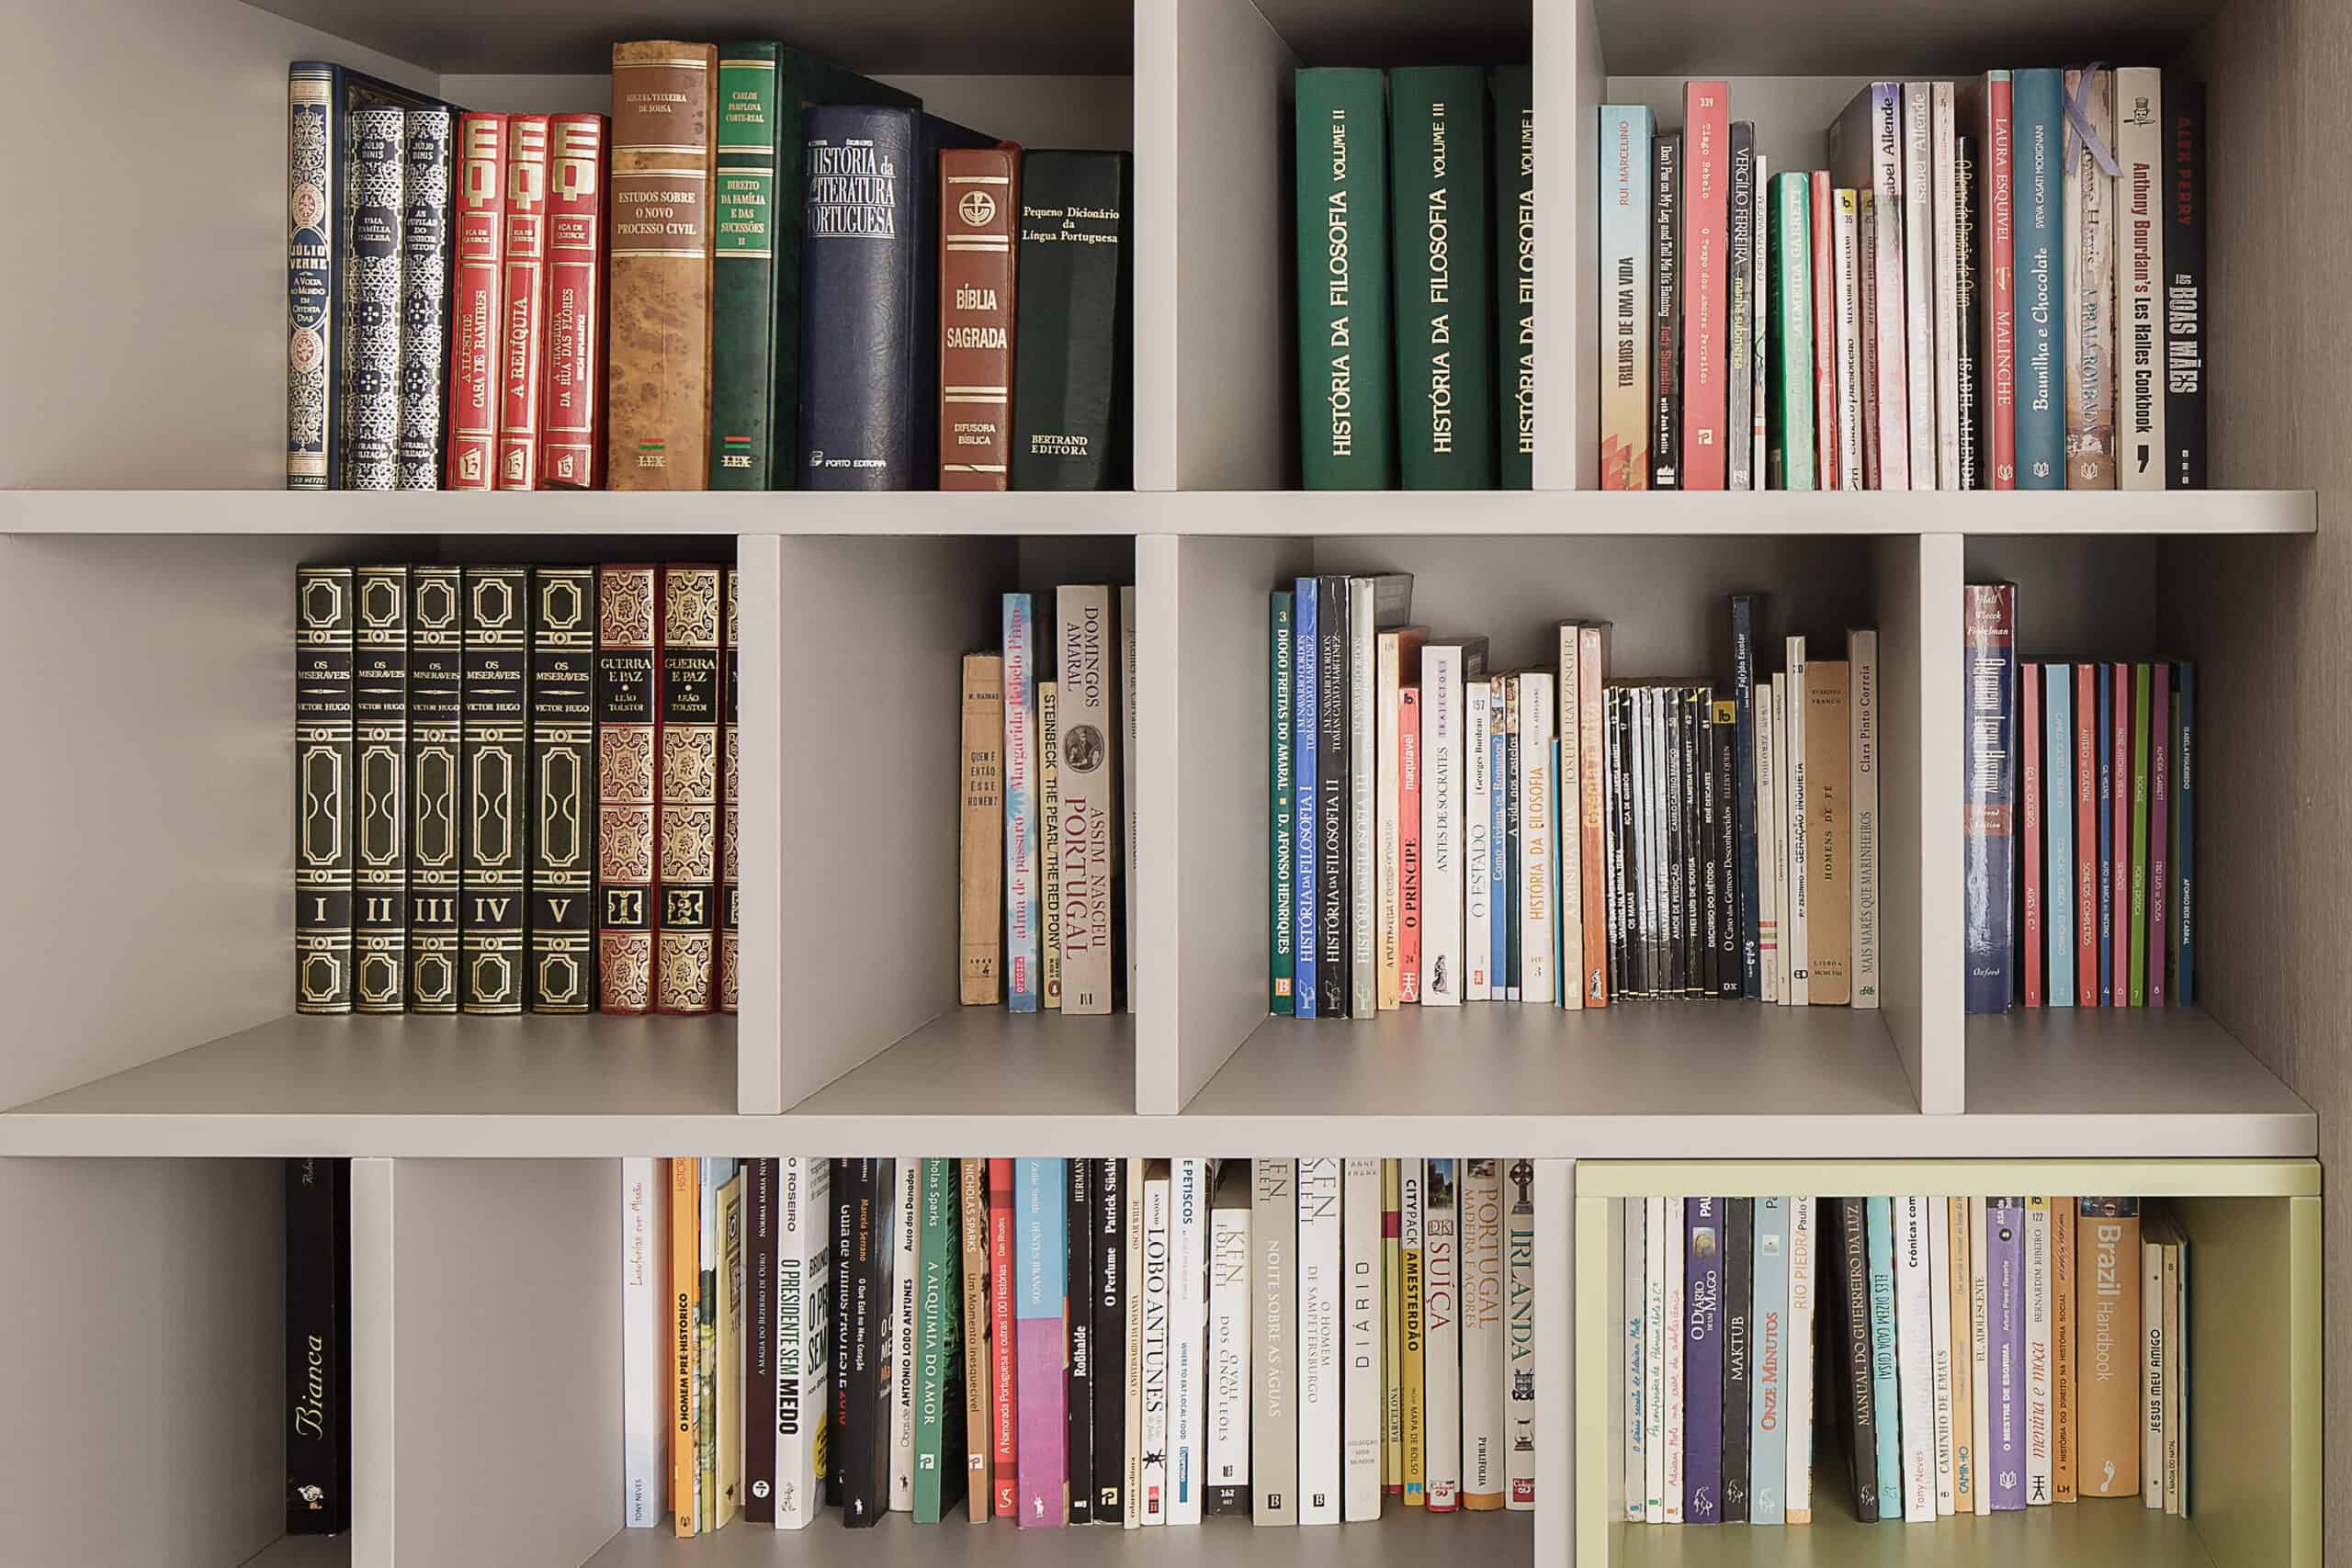 A well-organized bookshelf with an assortment of books arranged by size and color, featuring guest's book reviews.